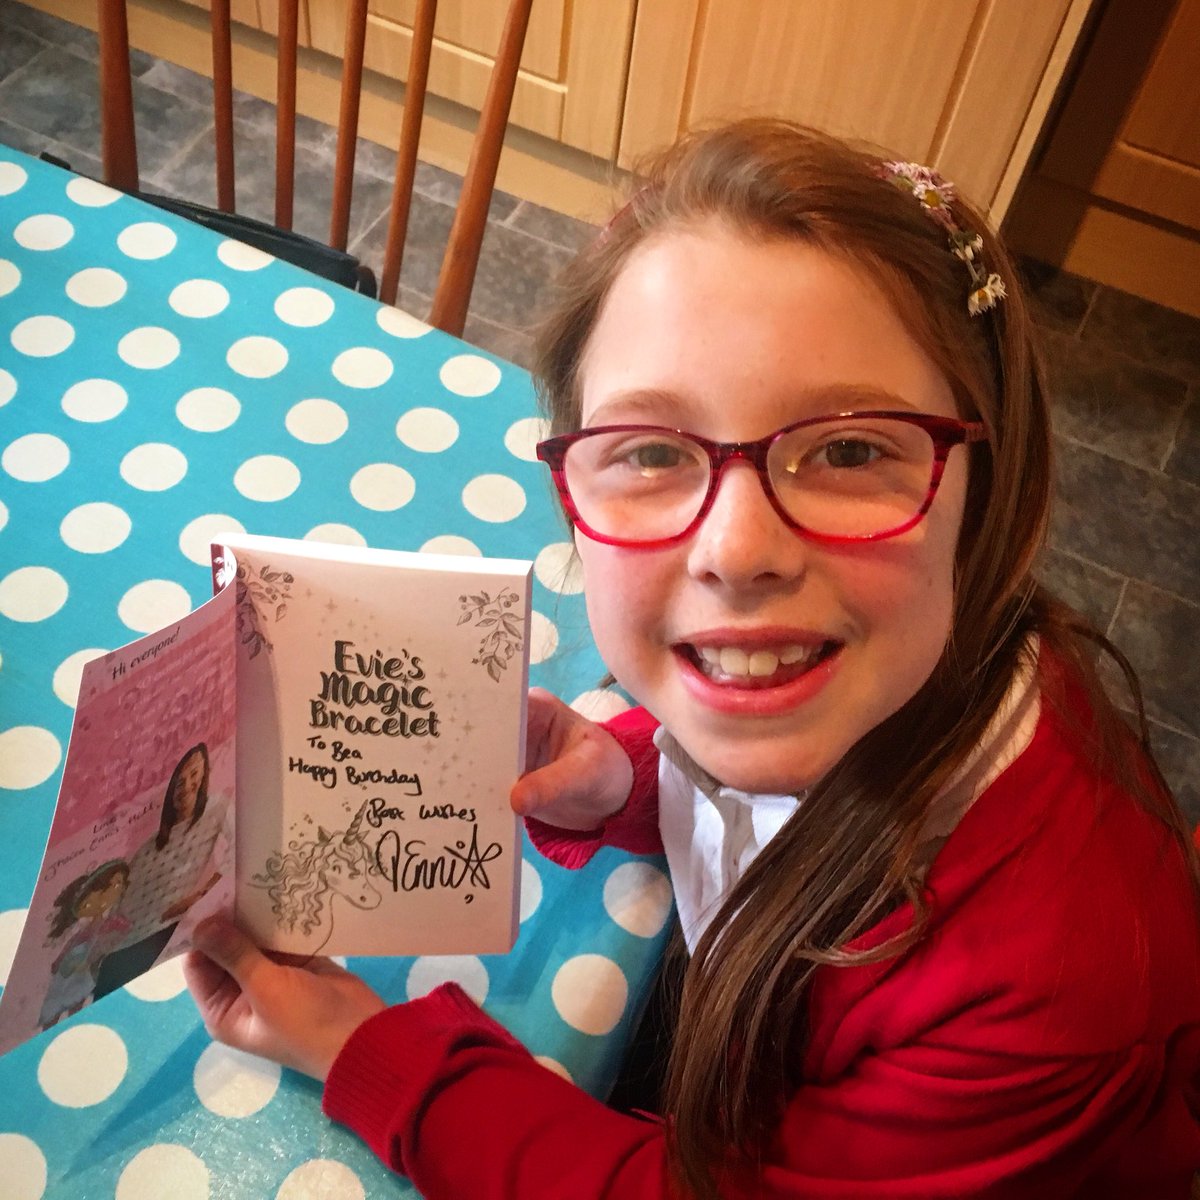 Thanks @J_Ennis ! You made a little girl very happy on her 9th birthday. Her signed copy of The Silver Unicorn is her favourite thing. She got books 4,5 and 6 today too. 
.
.
#kids #birthdays #books #jessicaennishill #reading #bookstagram #eviesmagicbracelet